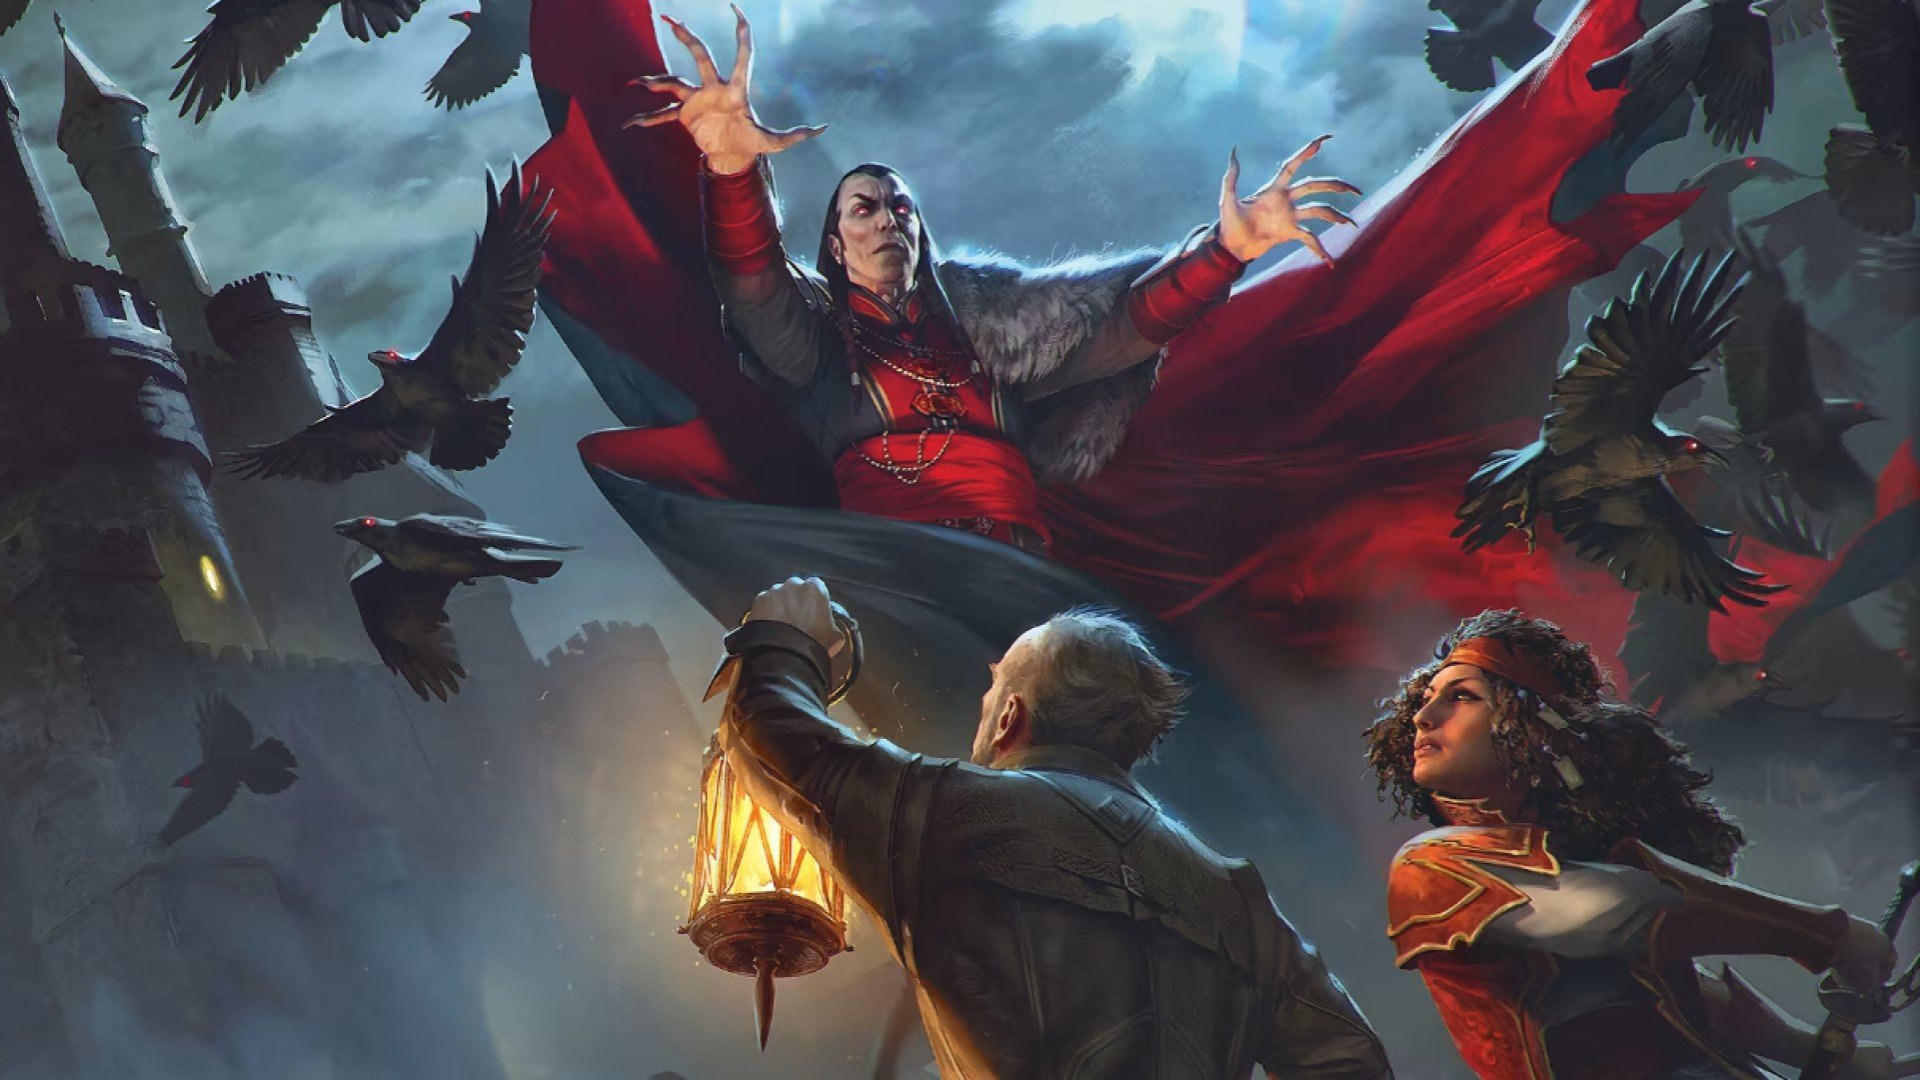 D&D vampire 5e - a vampire looking imposing, appearing before a group of heroes in a swirling cloud of ravens.